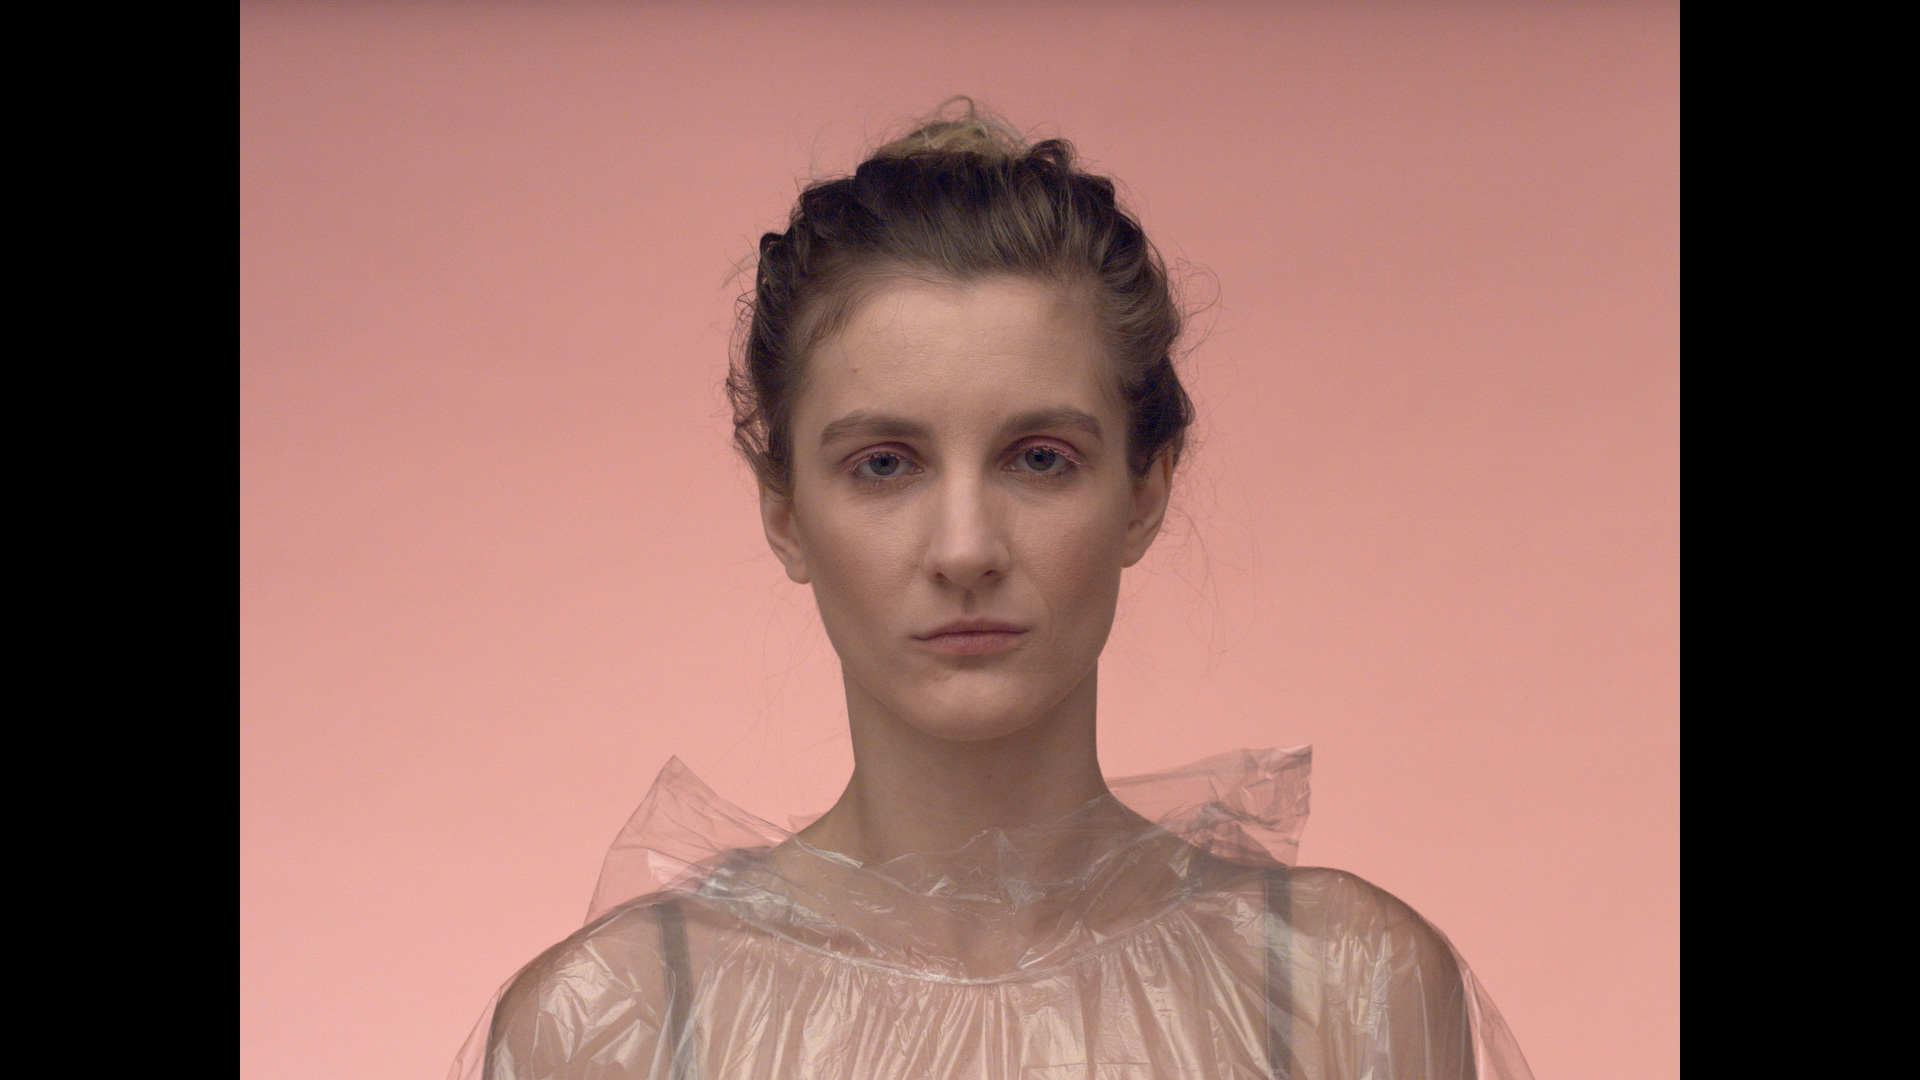 eszter galambos, Réka Ágnes Tóth in a raincoat in front of a pink background. Pastel pink. From the usic vide of Musica moralia: Architect. DOP, Cinematographer, operatőr: Eszter Galambos